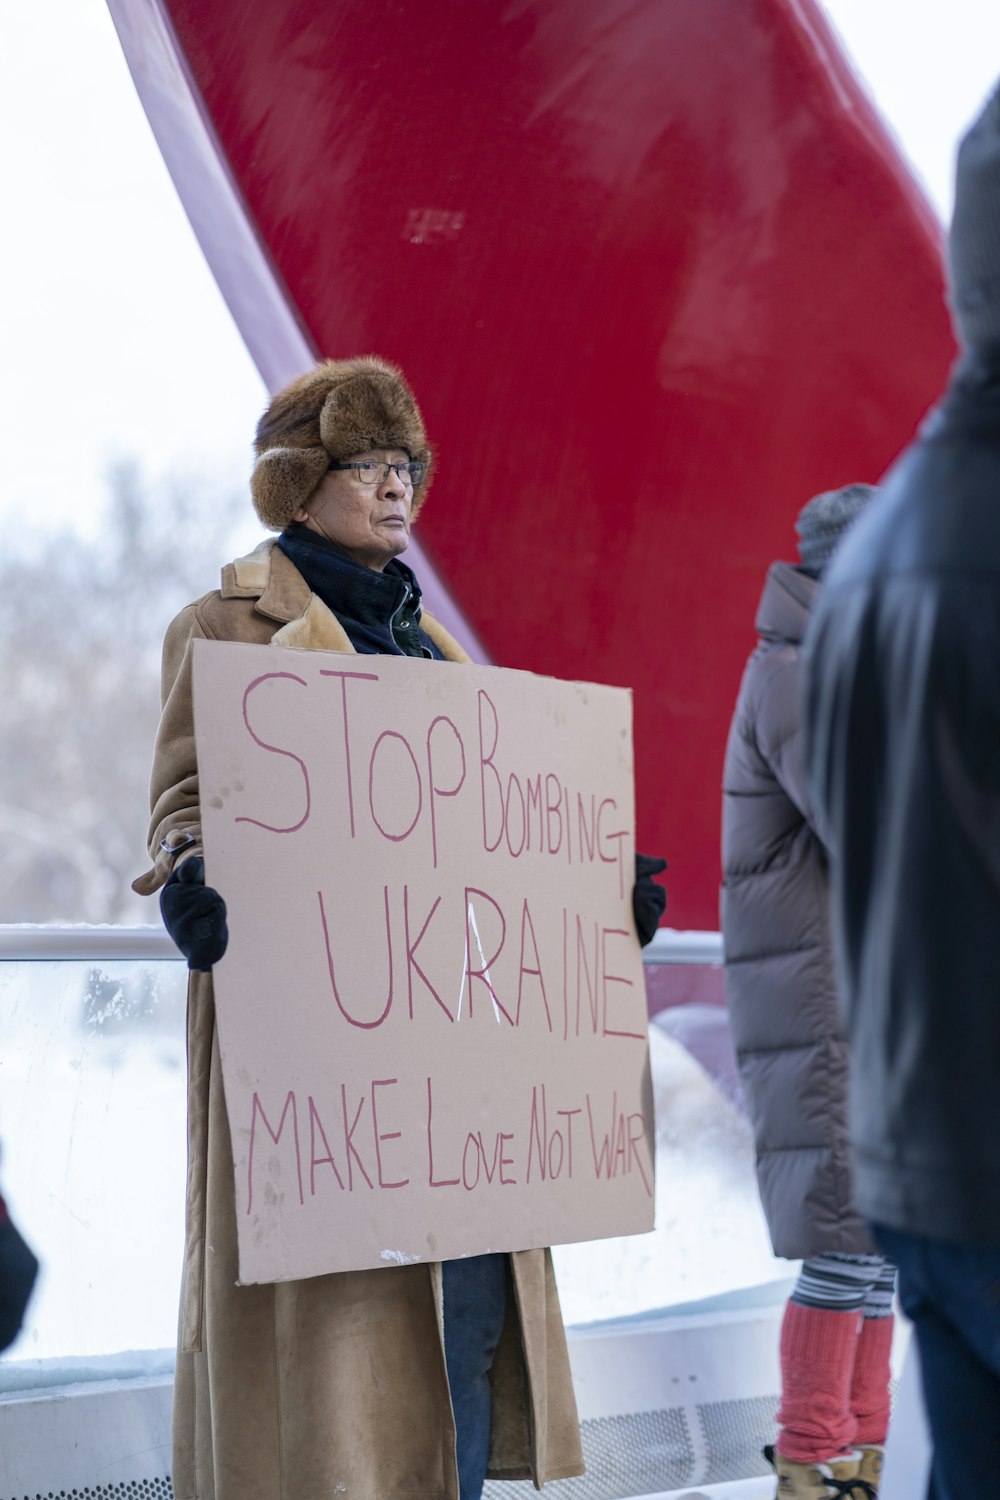 a woman holding a sign that says stop bombing ukraine make love not war